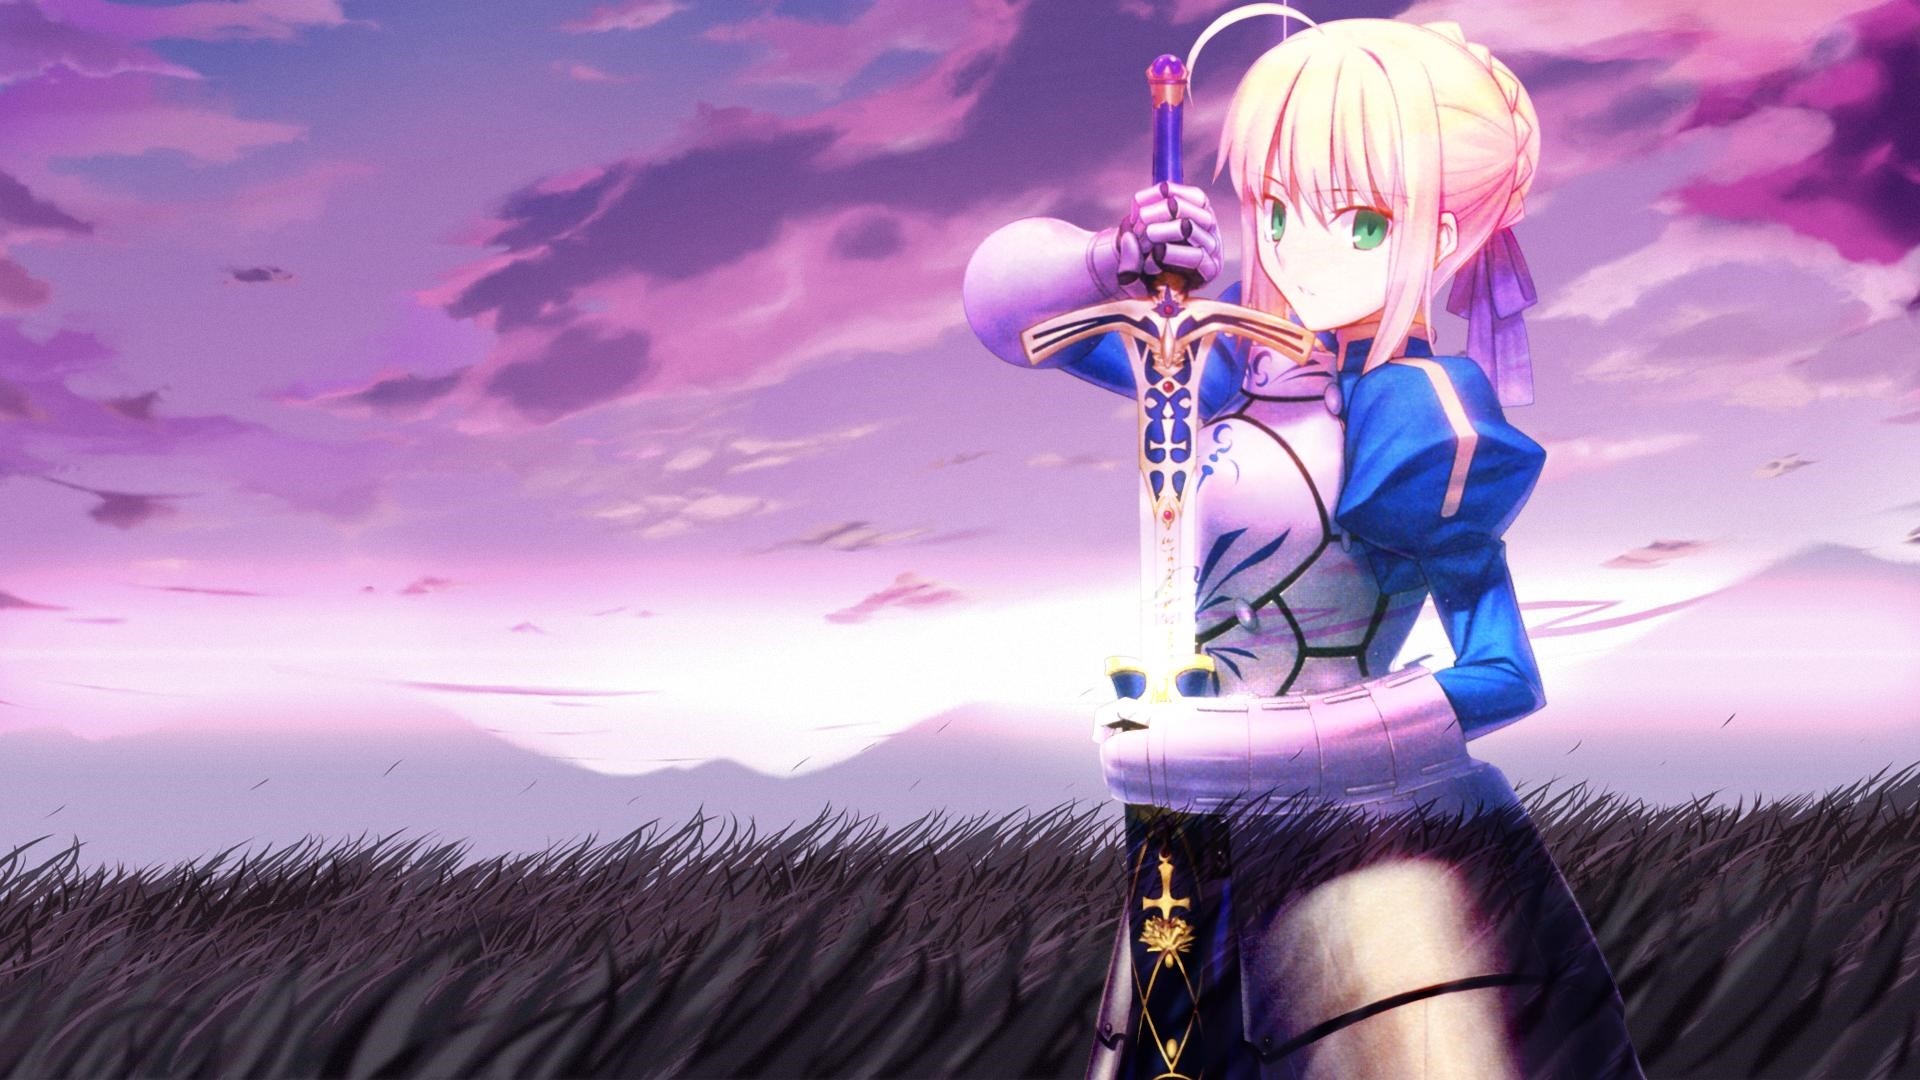 Fate Stay Night Saber Wallpaper Download Full